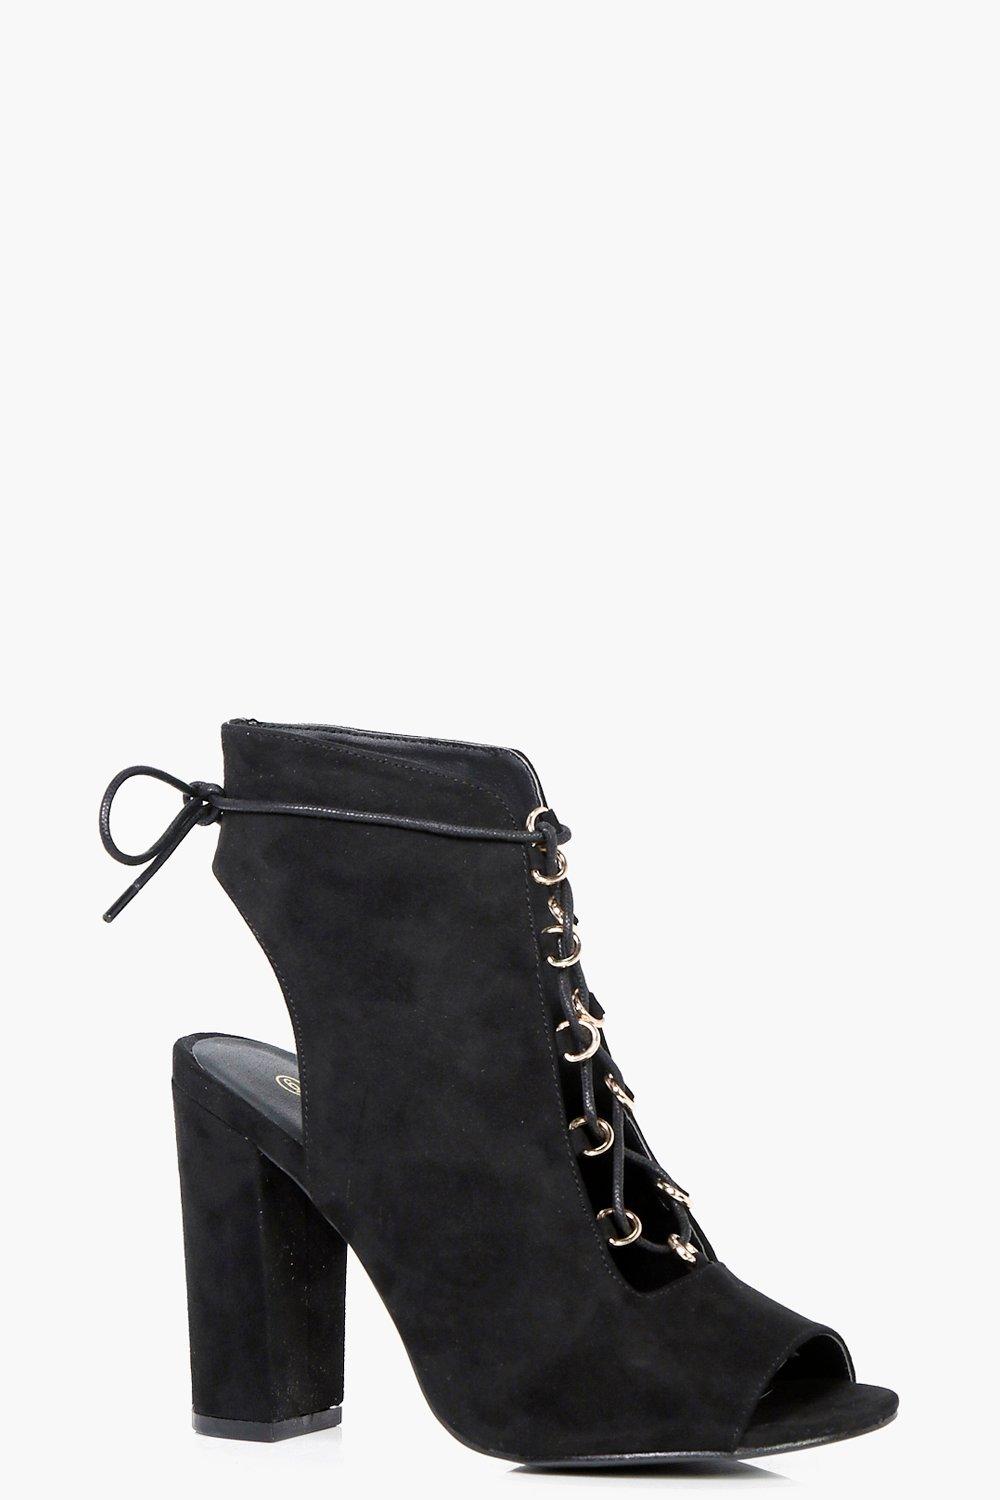 Tia Wide Fit Lace Up Shoe Boots | Boohoo